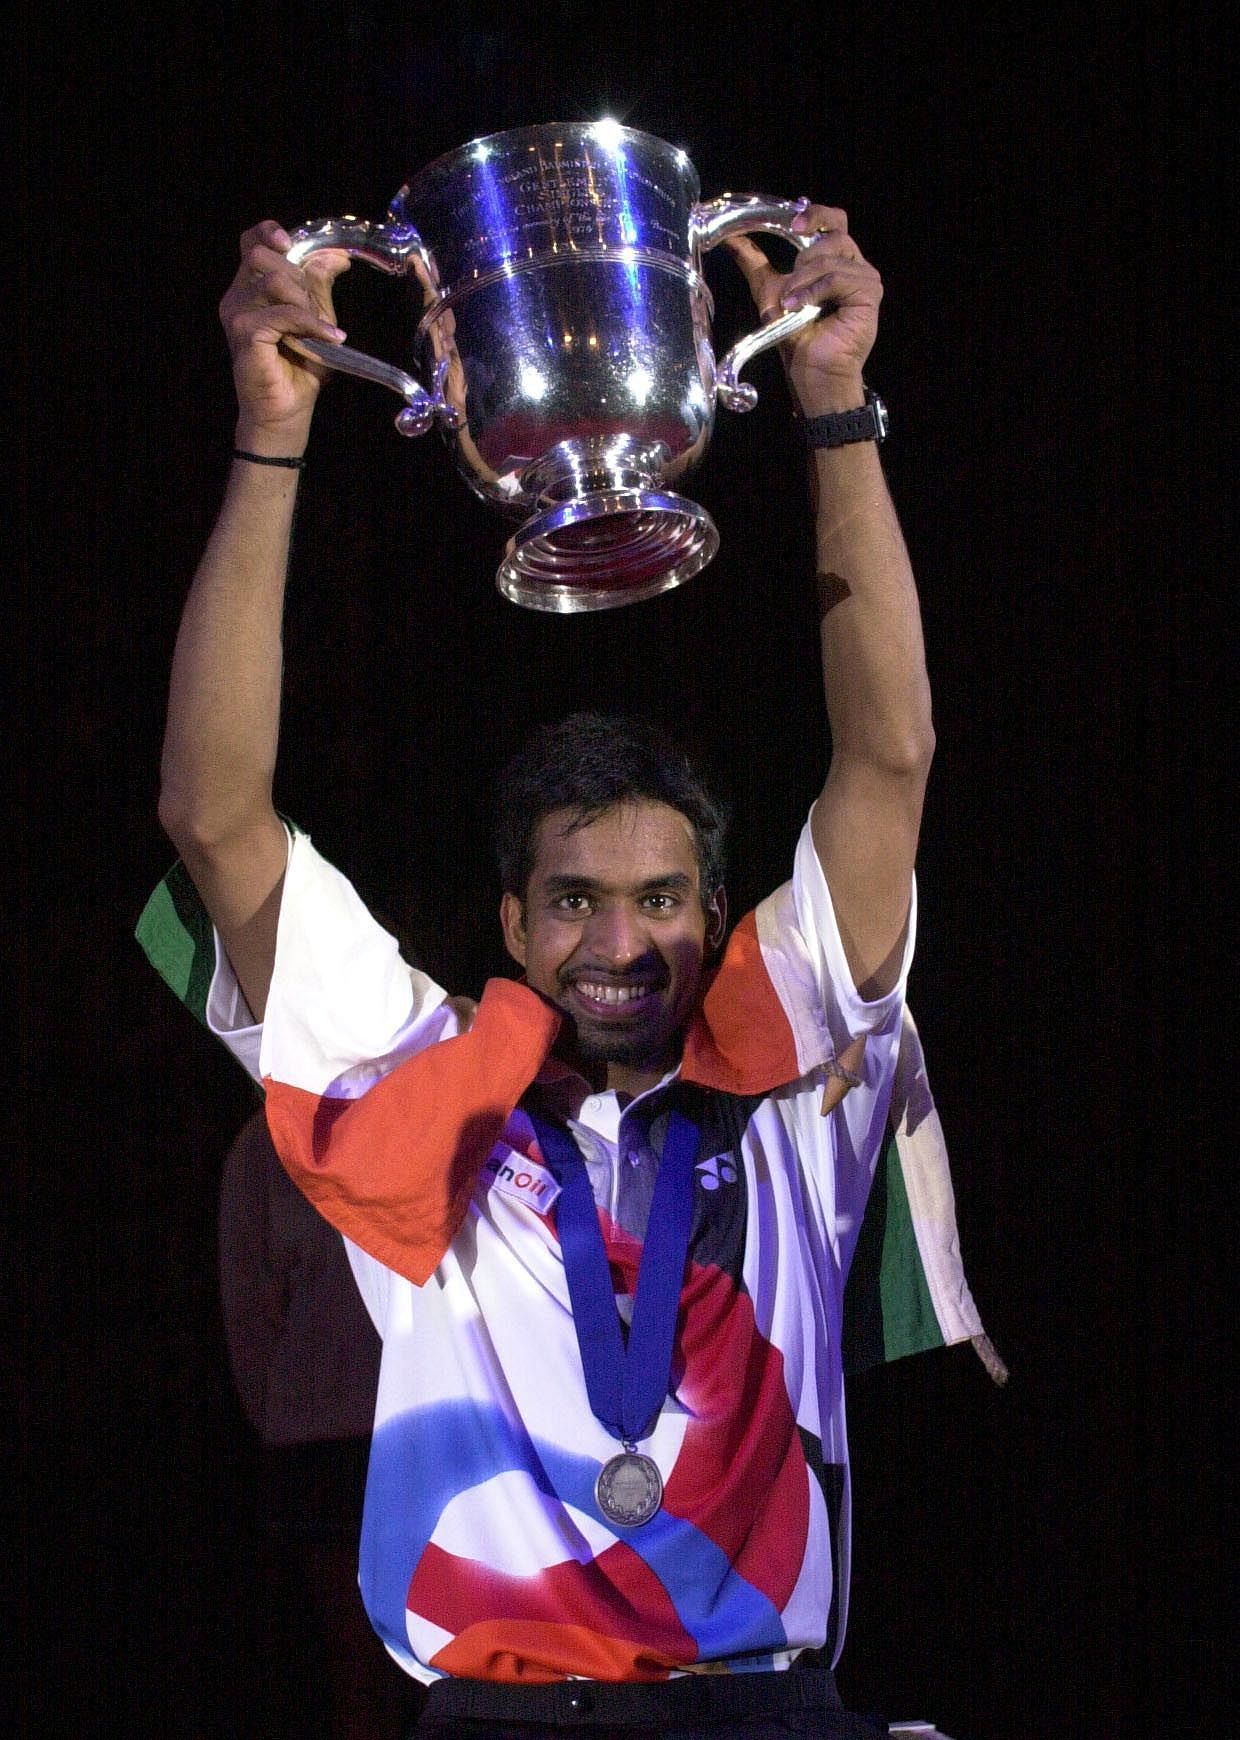 Pullela Gopichand holds aloft the Yonex All England Open trophy (Image credits: Getty Images).